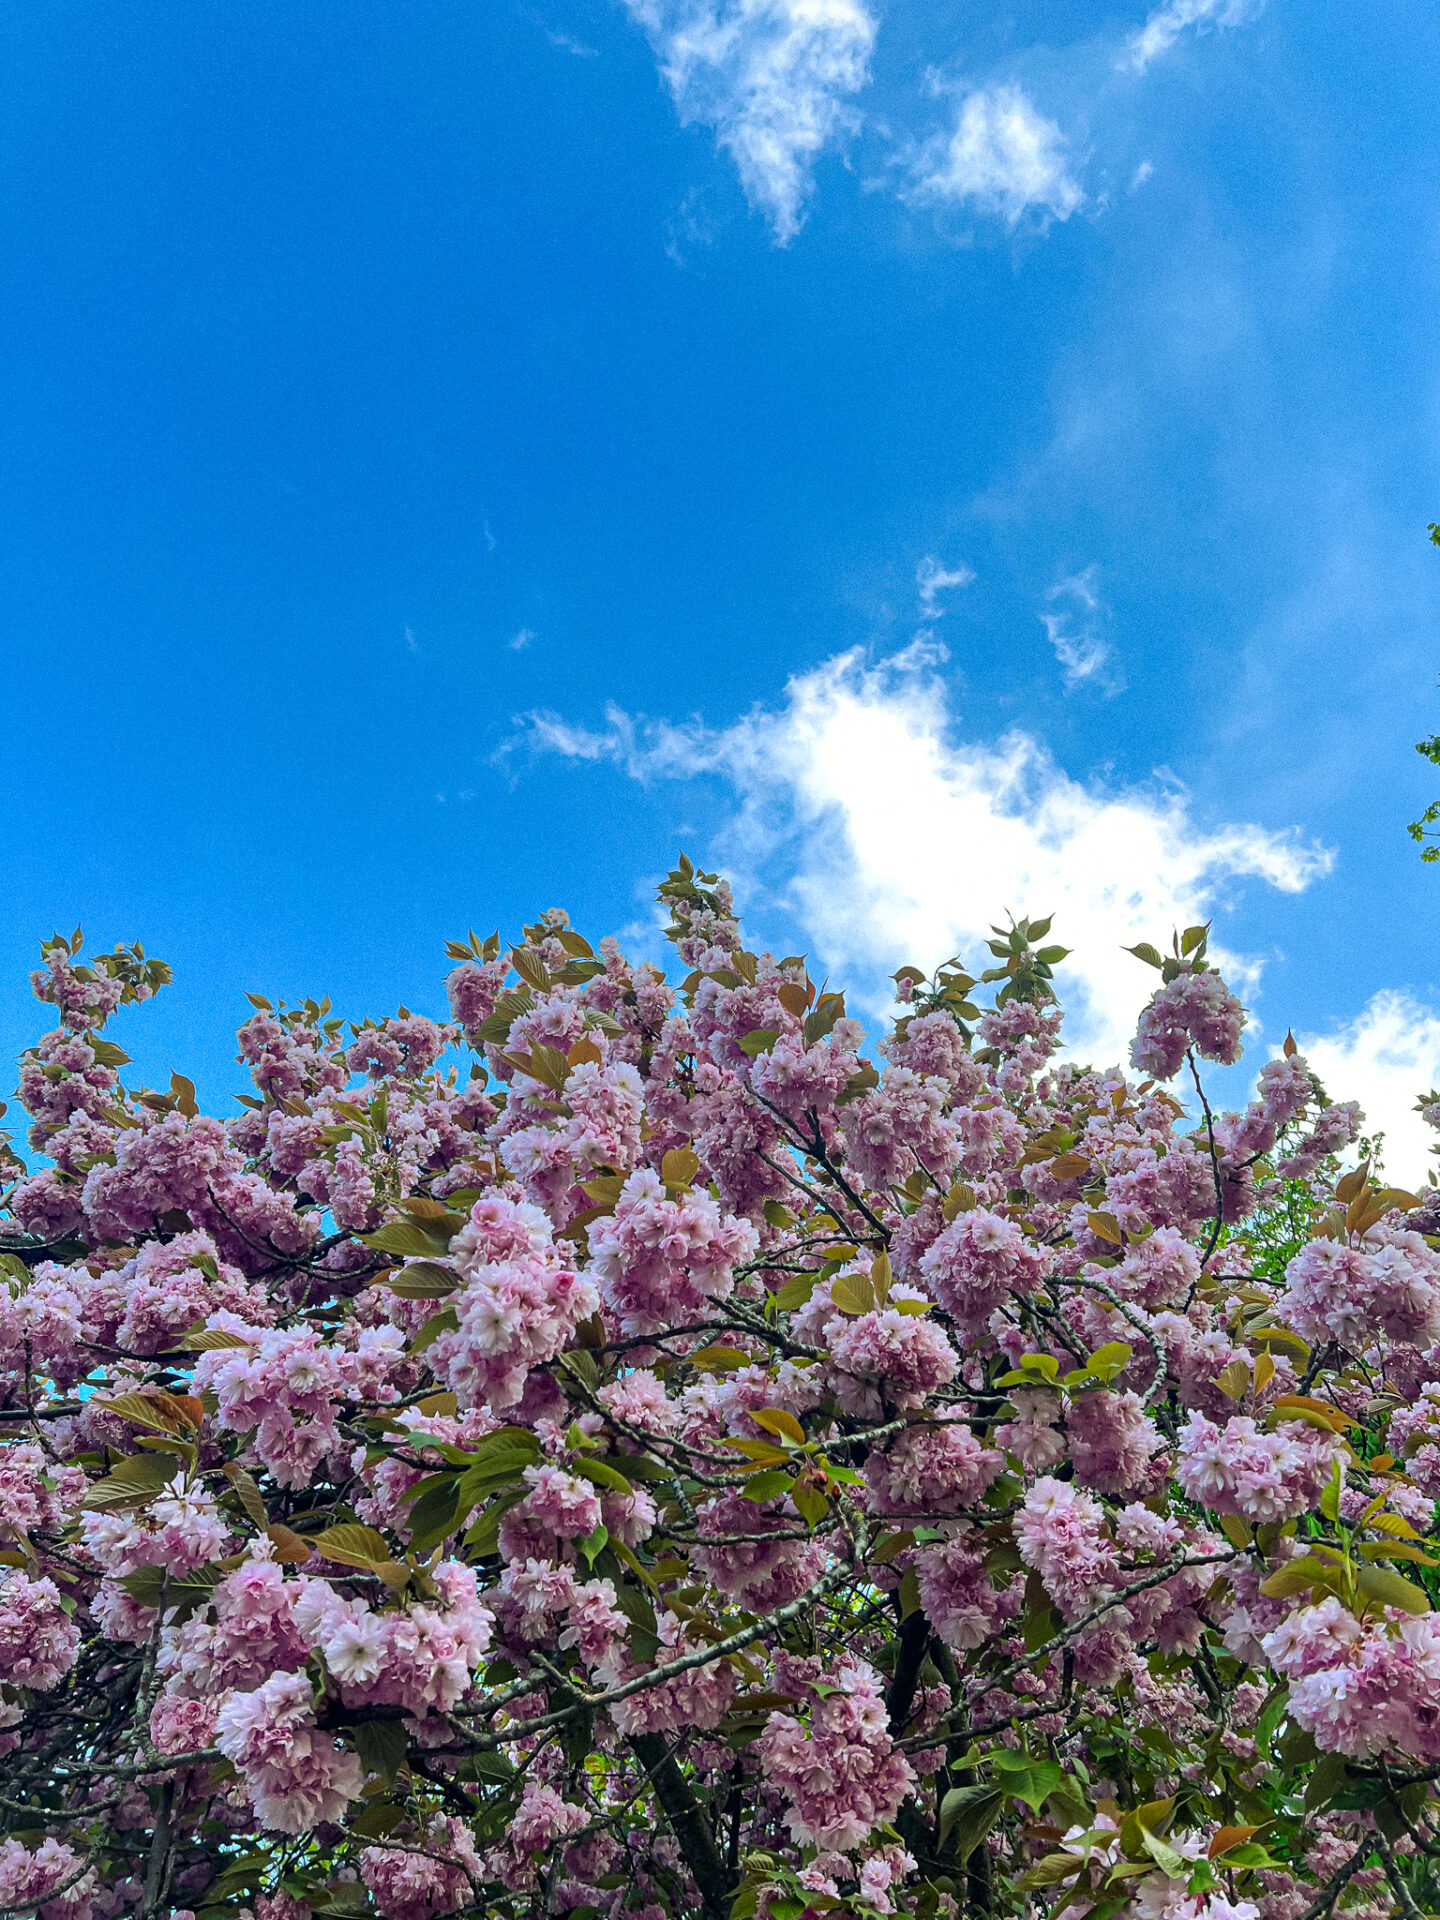 Cherry blossoms tree and the blue sky